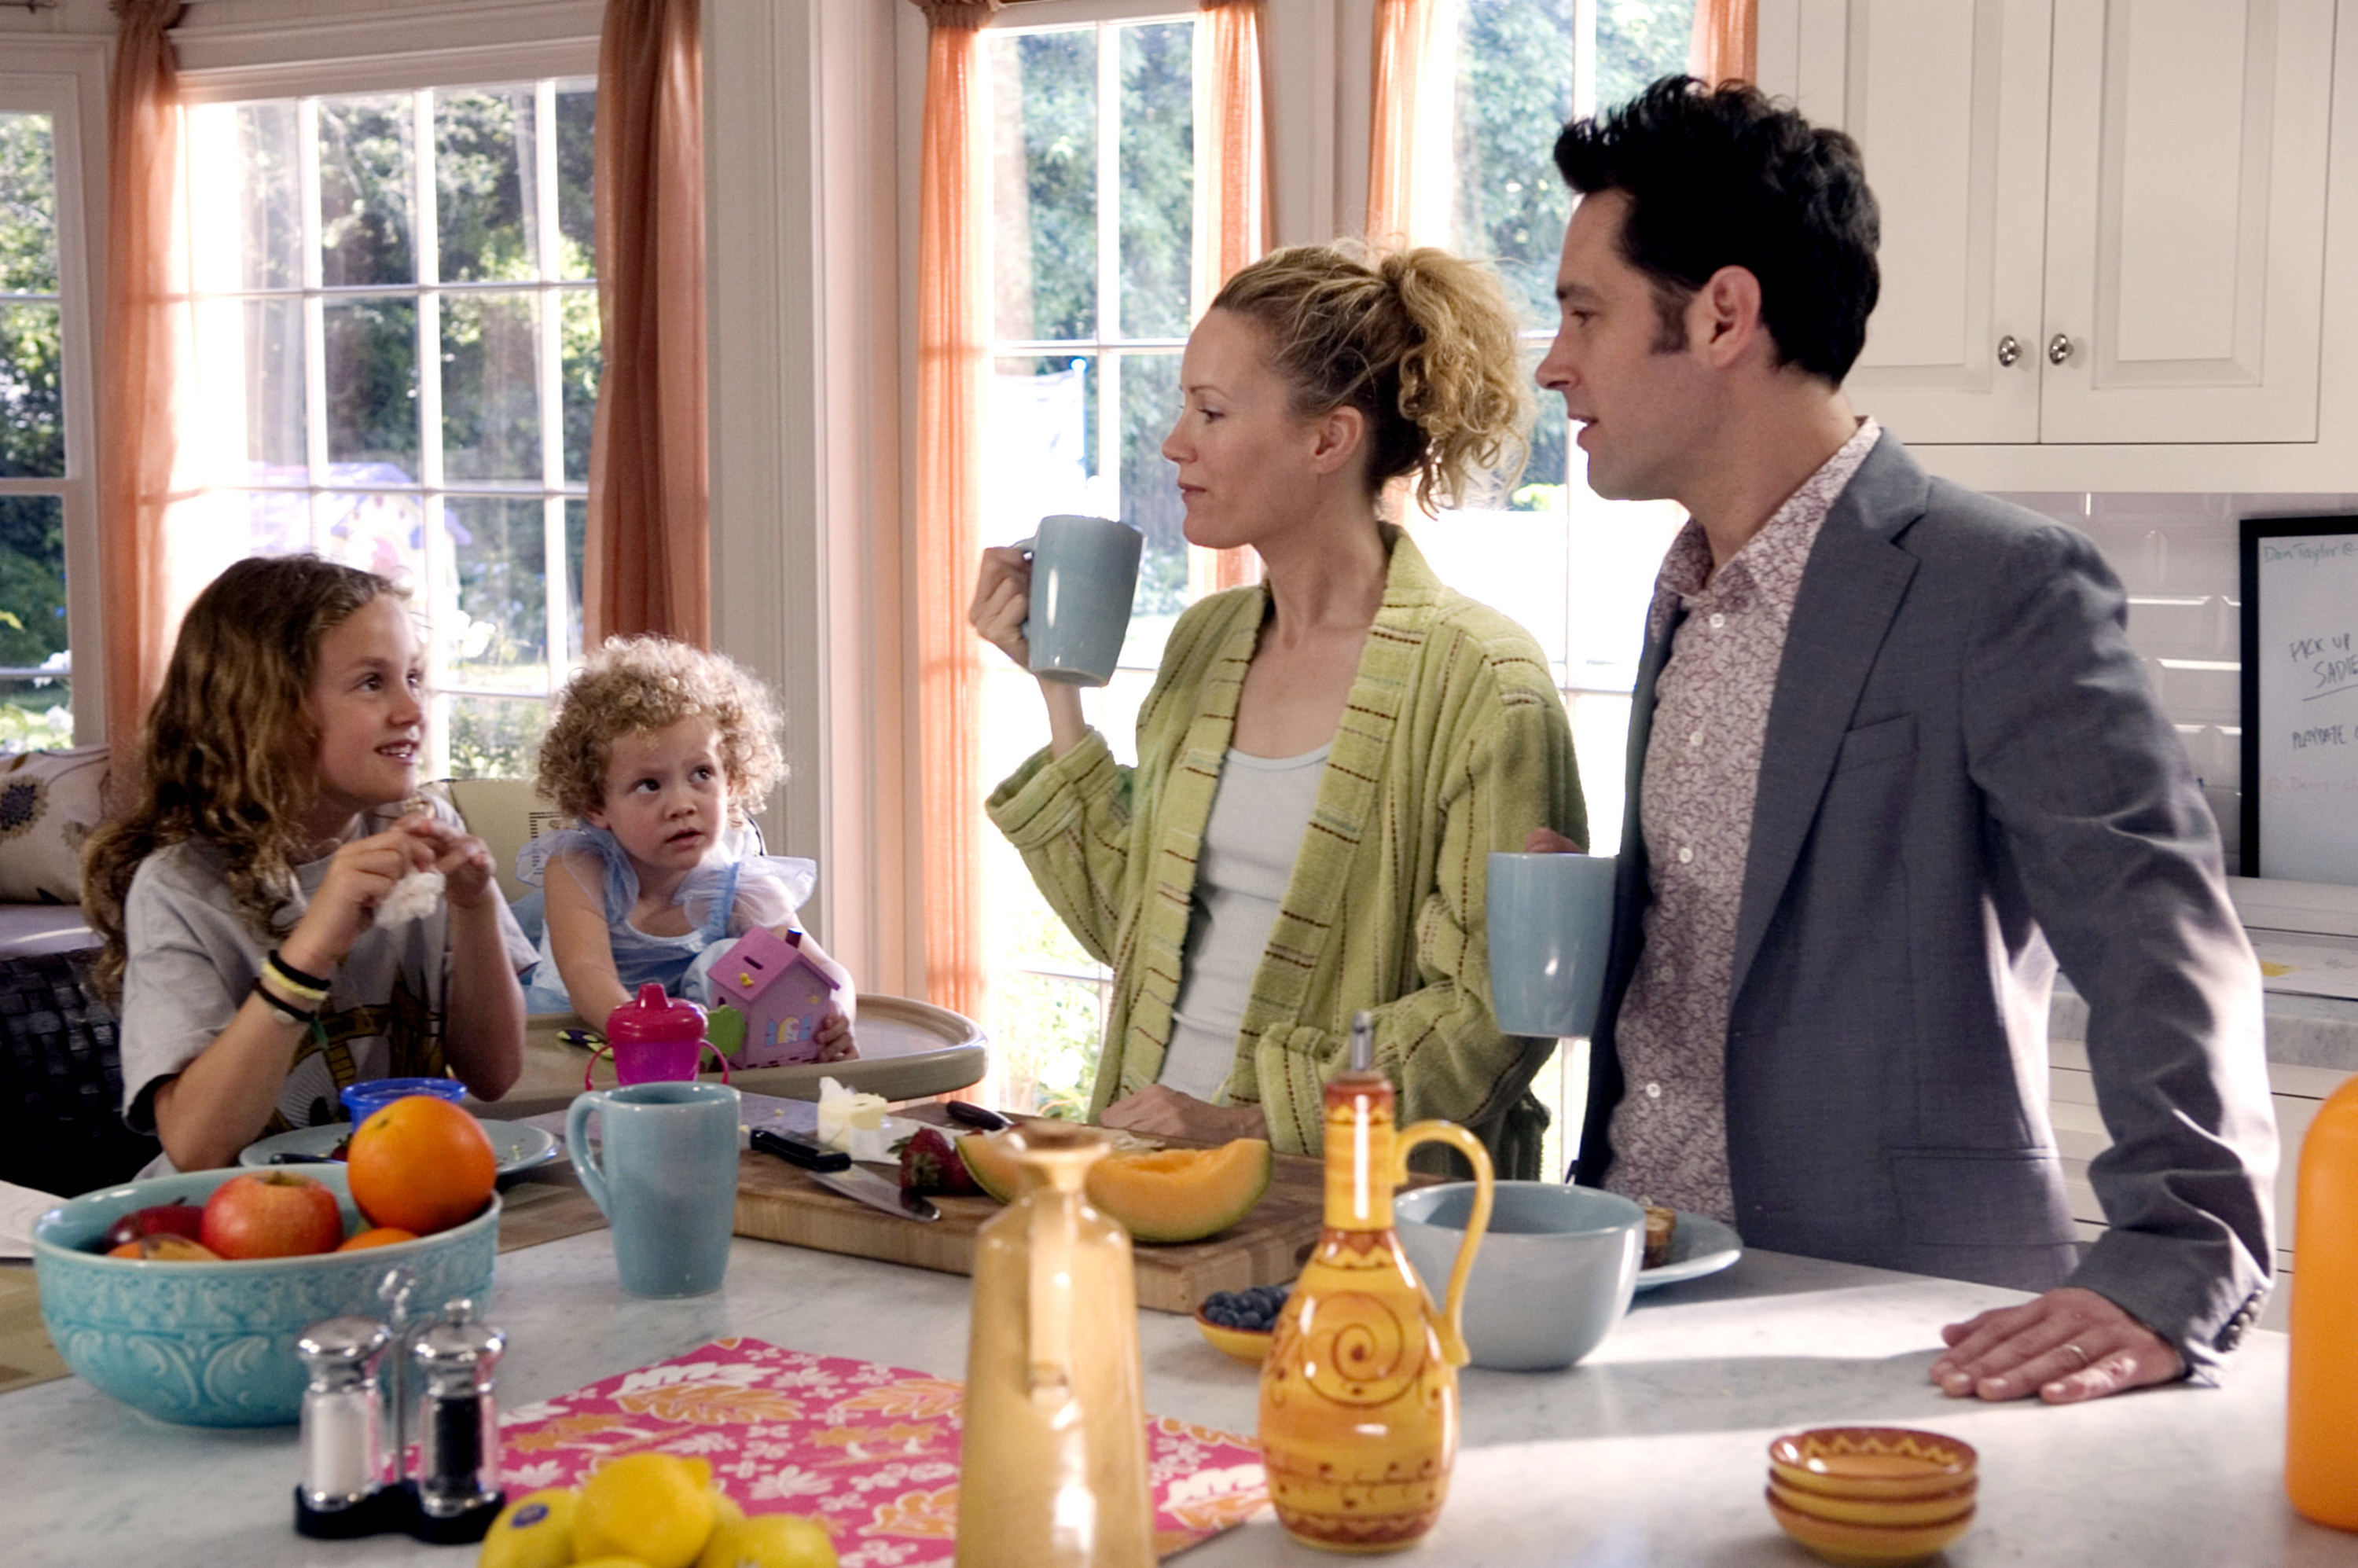 Leslie, her two daughters, and Paul Rudd around a kitchen table